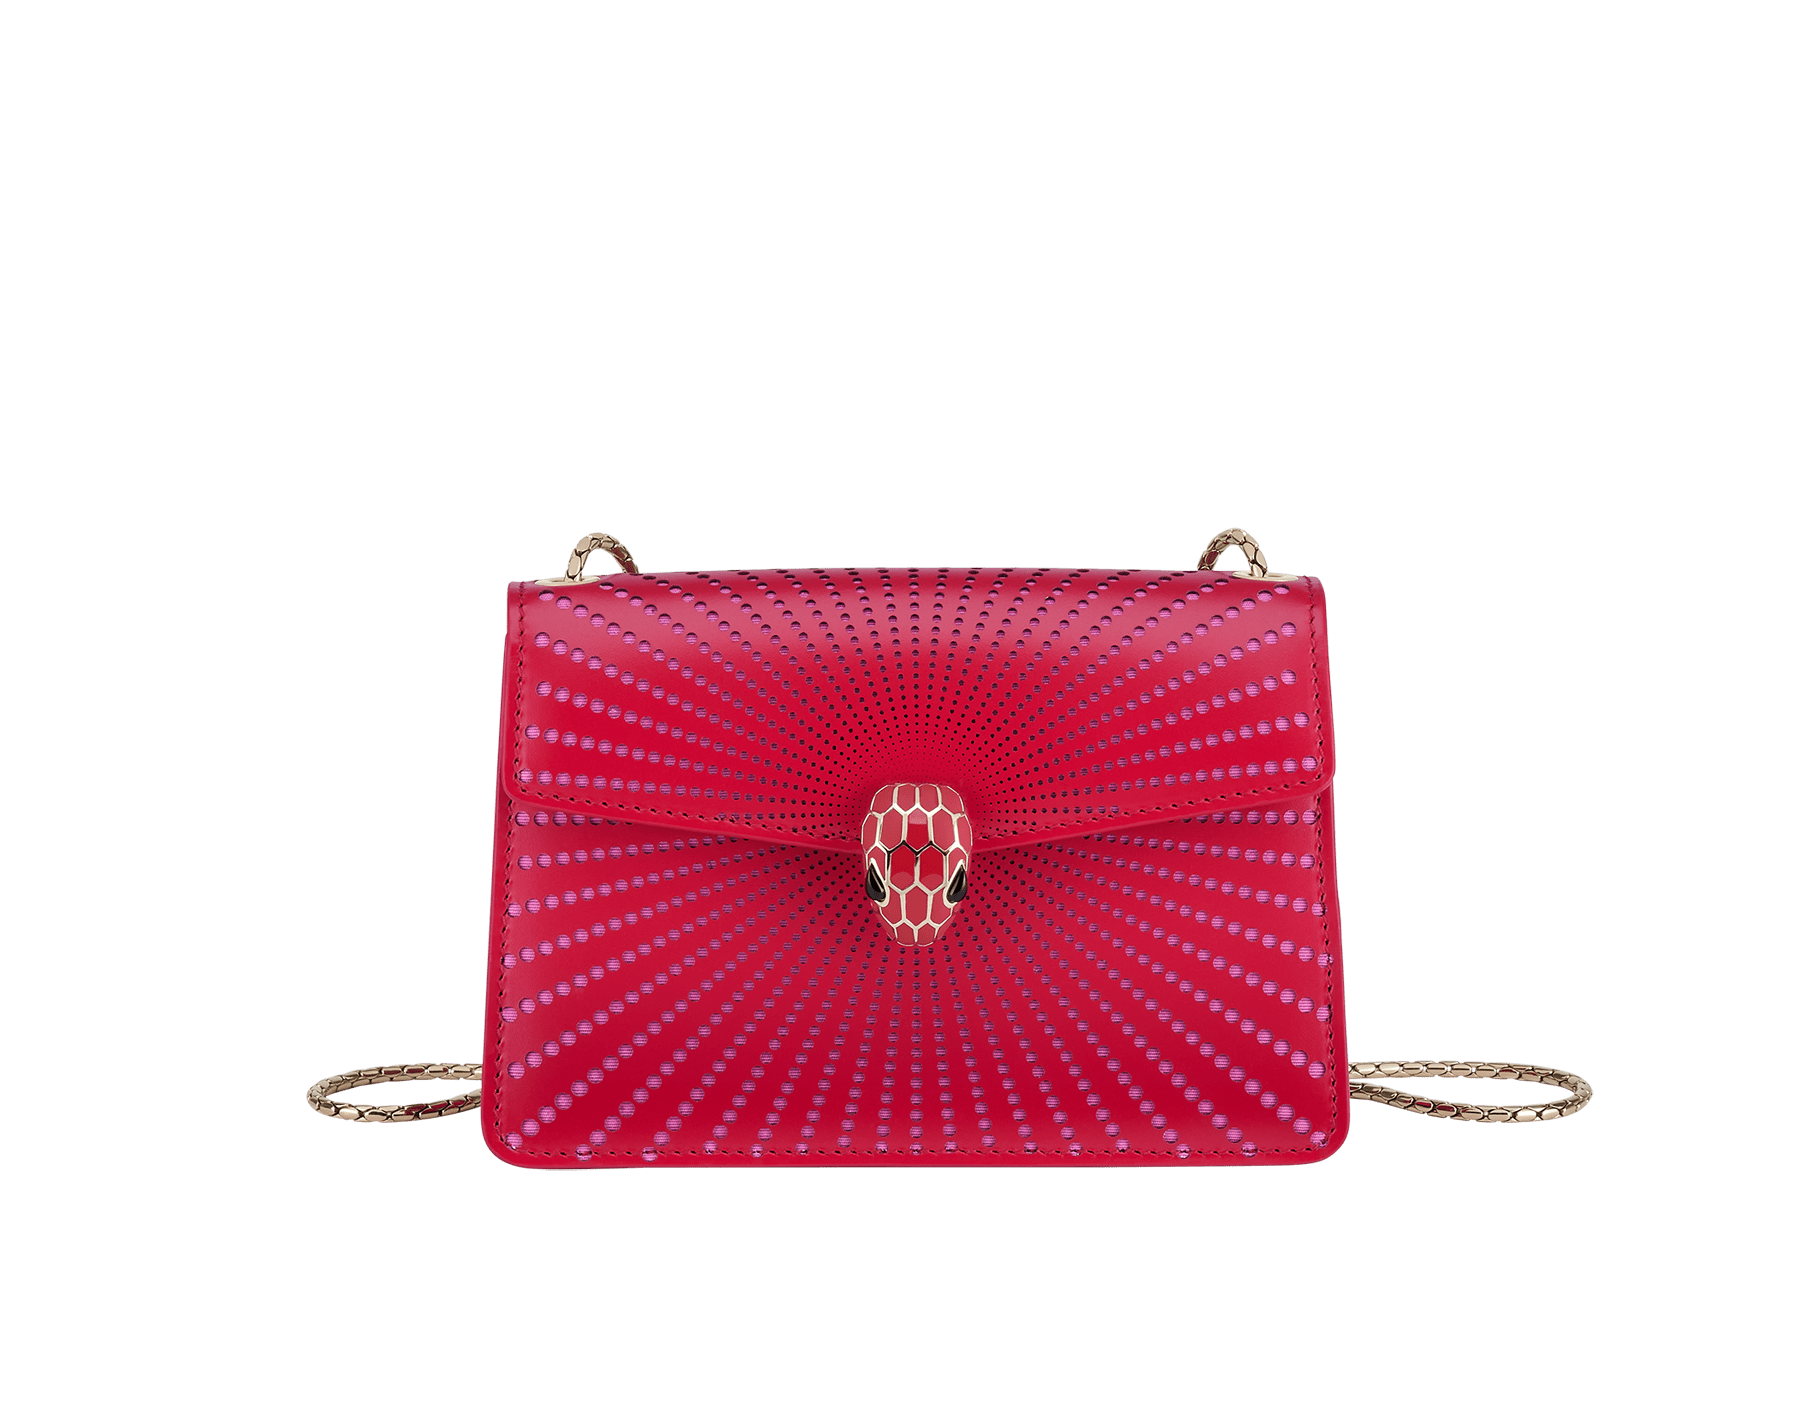 Serpenti Forever mini crossbody bag in amaranth garnet red laser-cut calf leather with taffy quartz pink nappa leather lining. Captivating snakehead closure in light gold-plated brass embellished with matt and shiny amaranth garnet red enamel scales and black onyx eyes. Online Exclusive. 986-LCL image 1